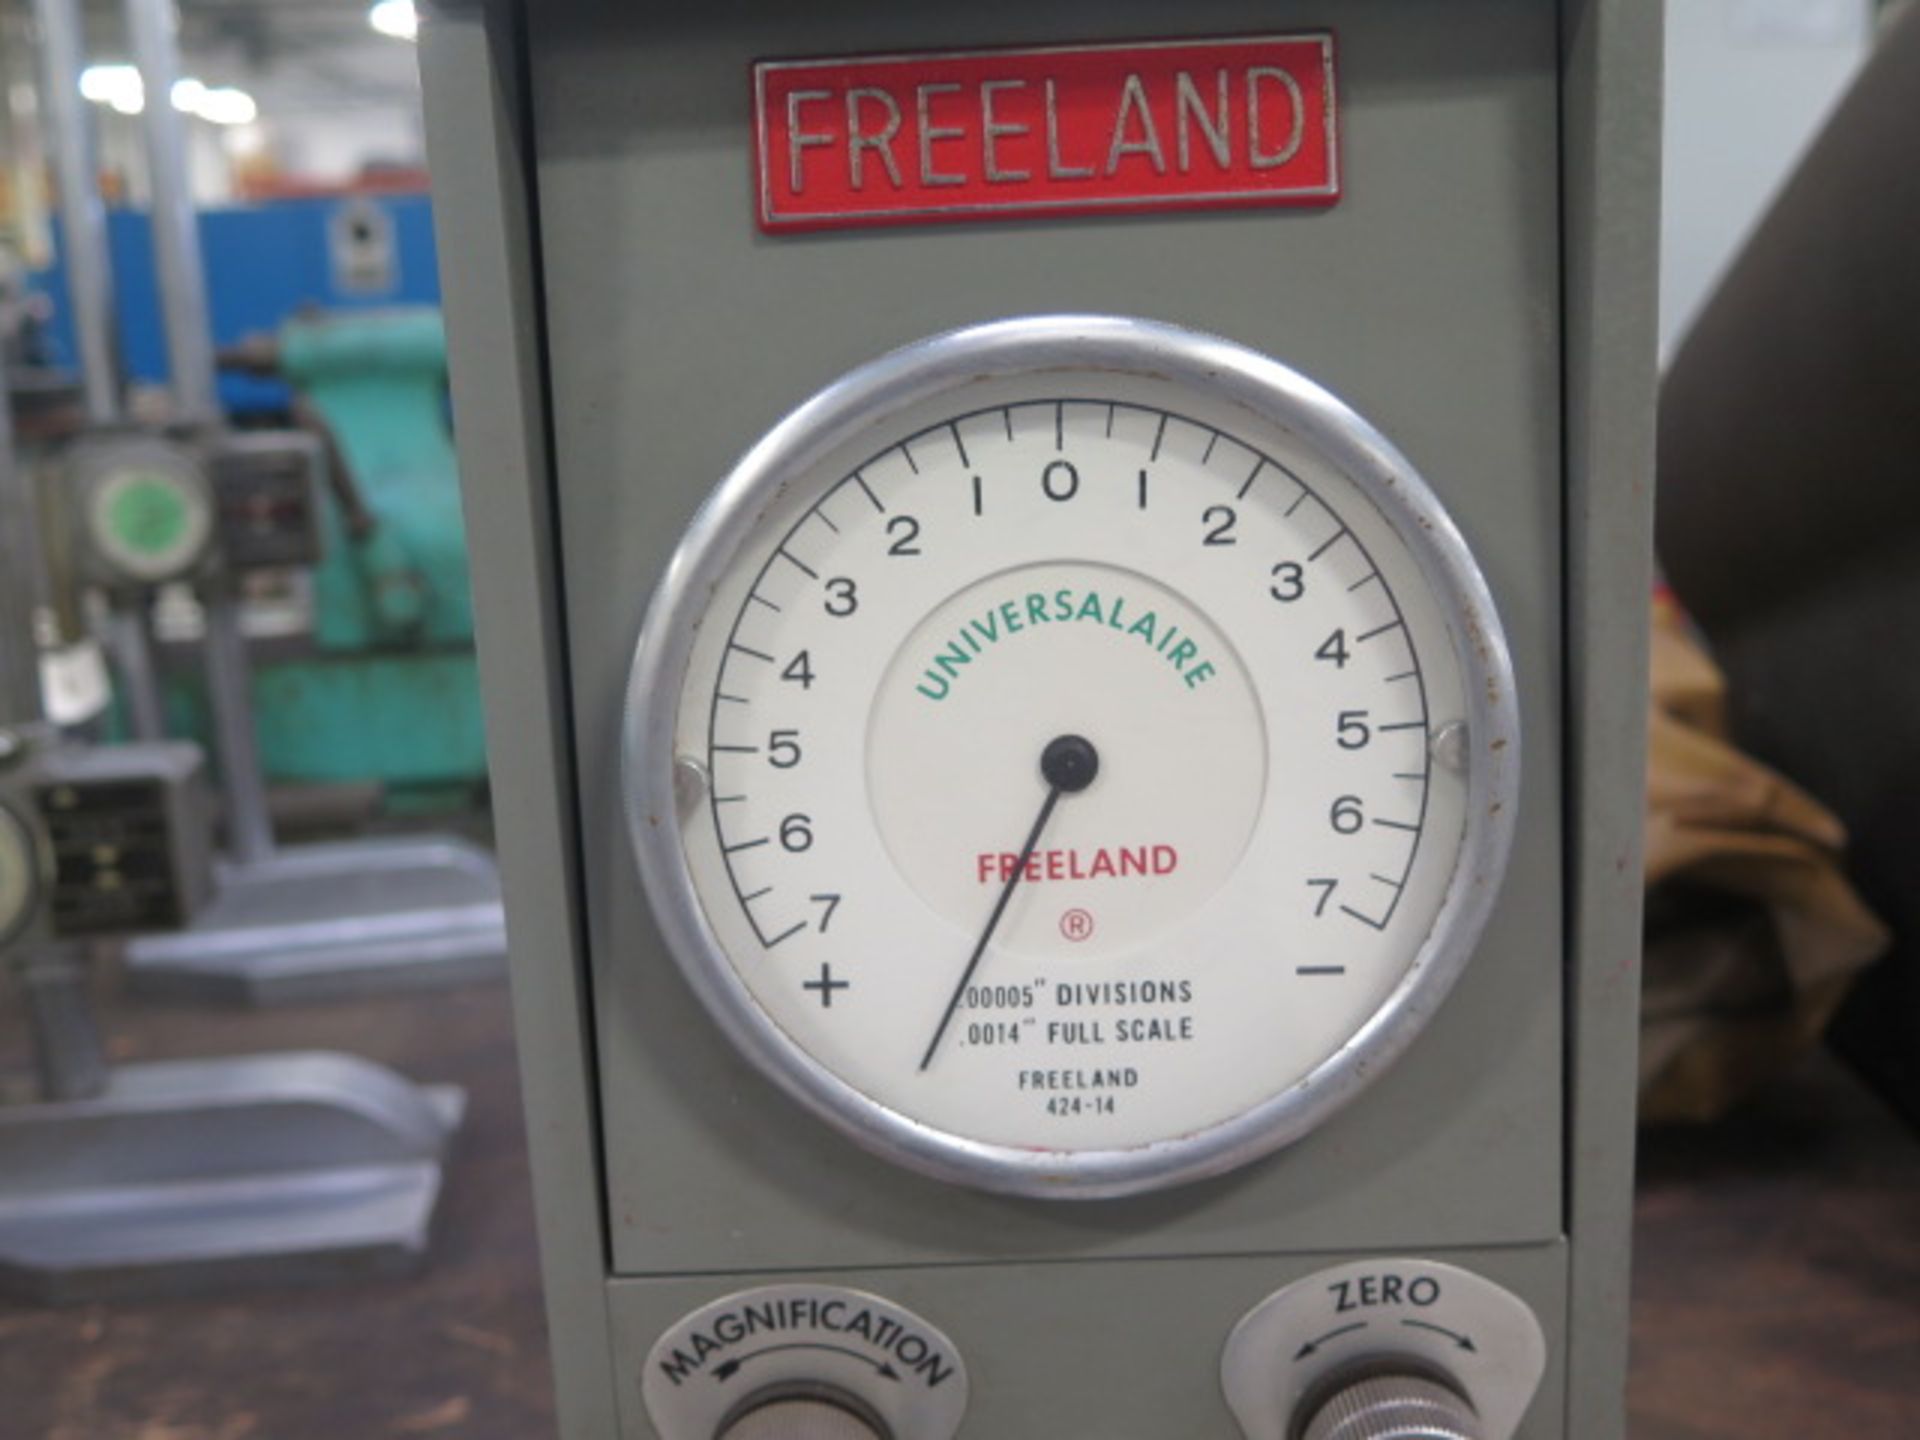 Freeland "universalaire" mdl. 424-14 Air Gage - Image 2 of 4